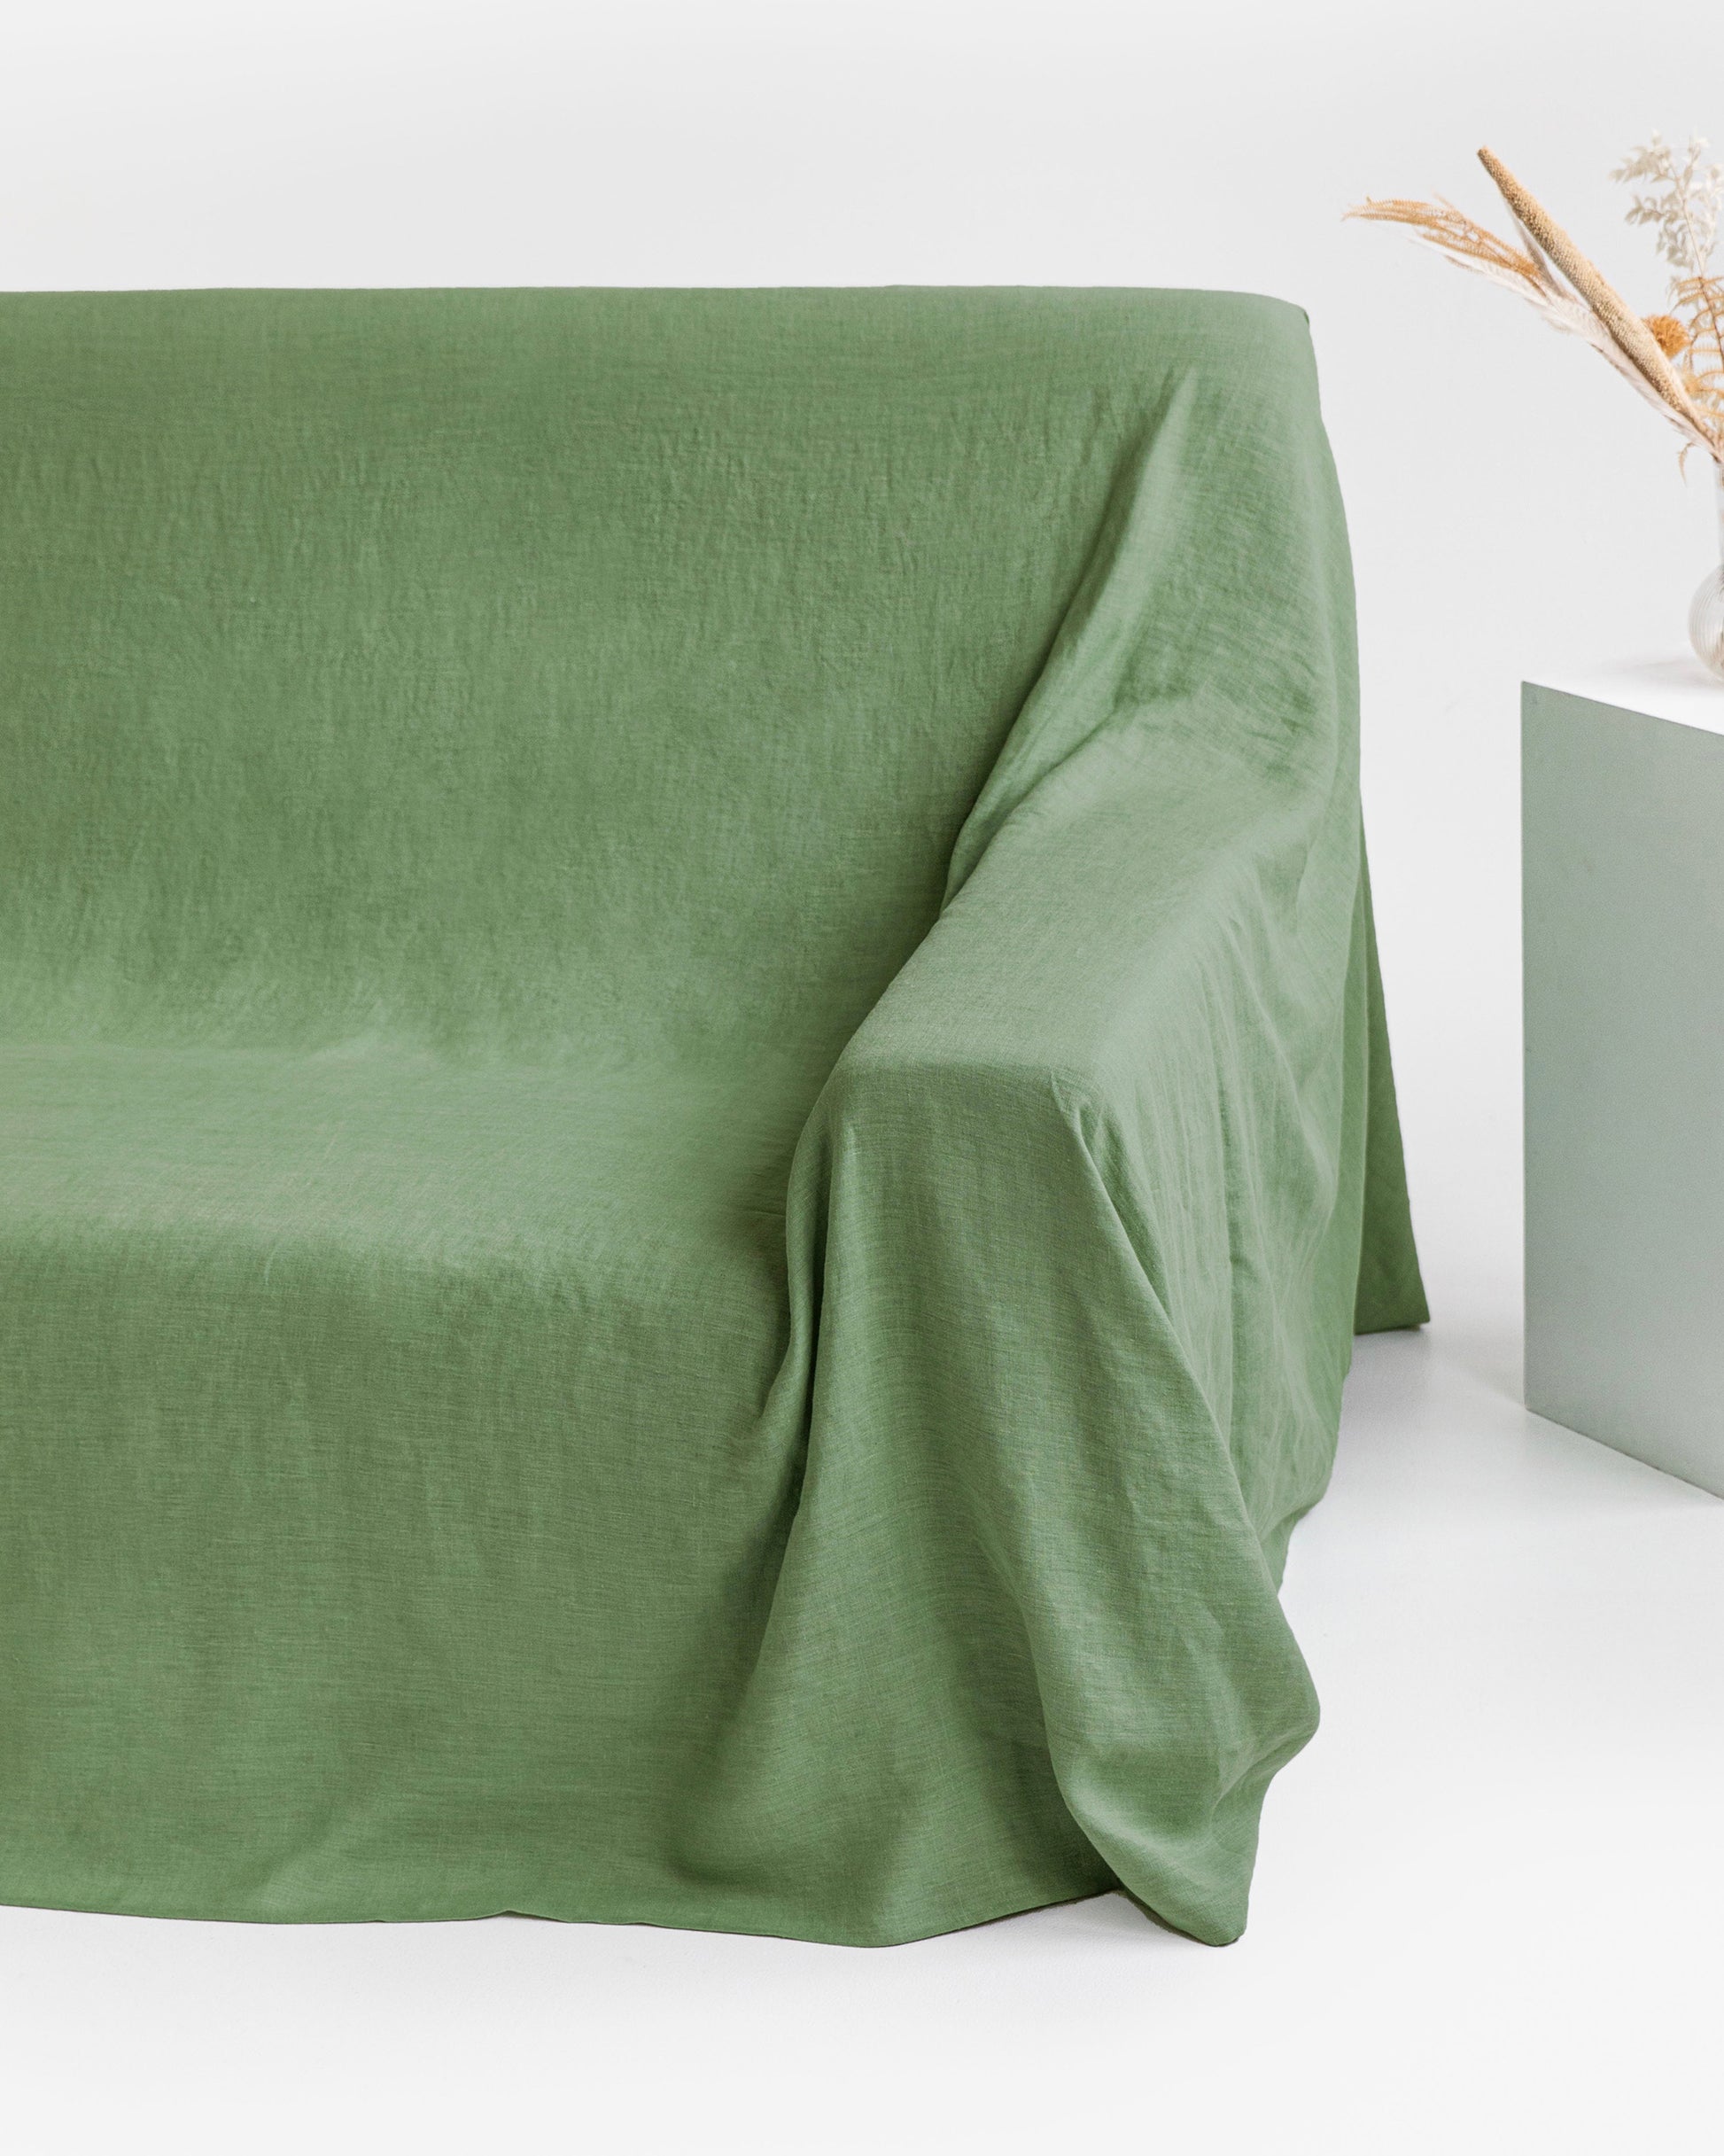 Linen couch cover in Forest green - MagicLinen